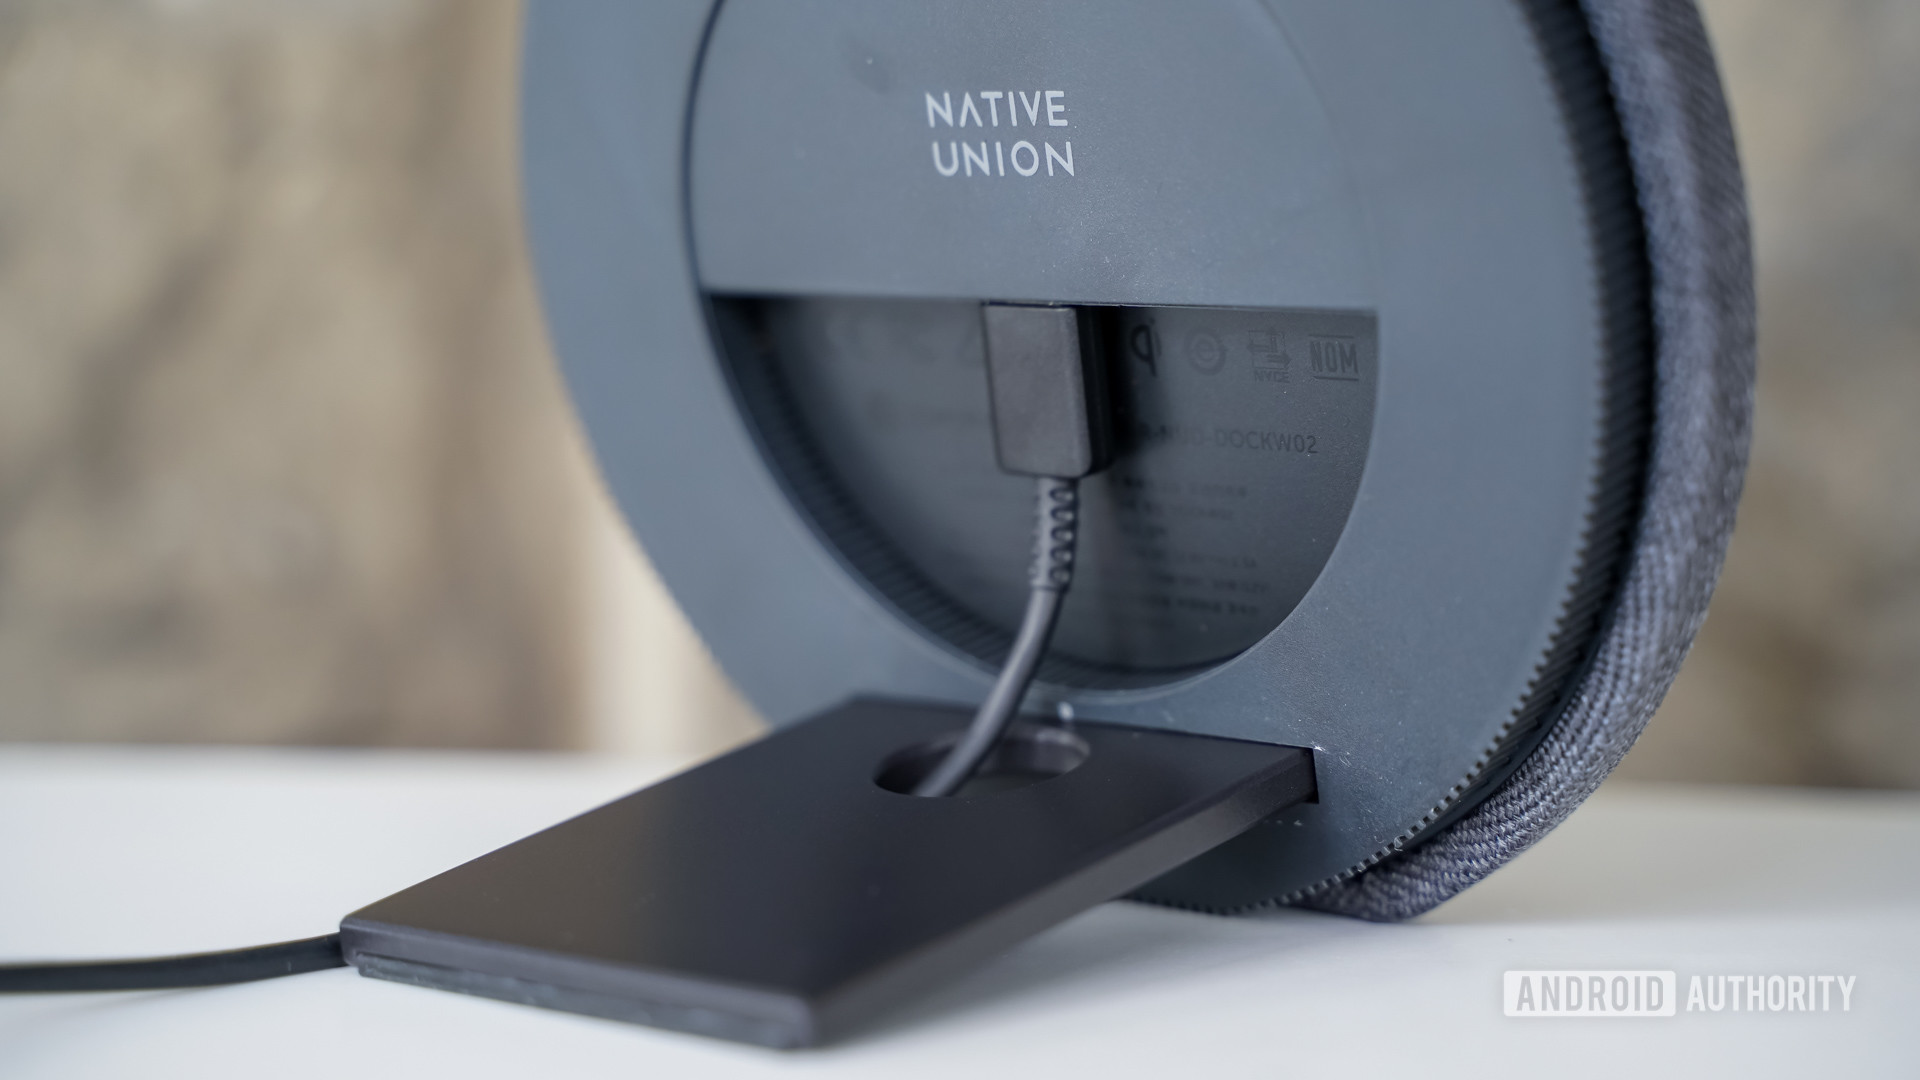 Native Union Dock Wireless Charger rear with cable